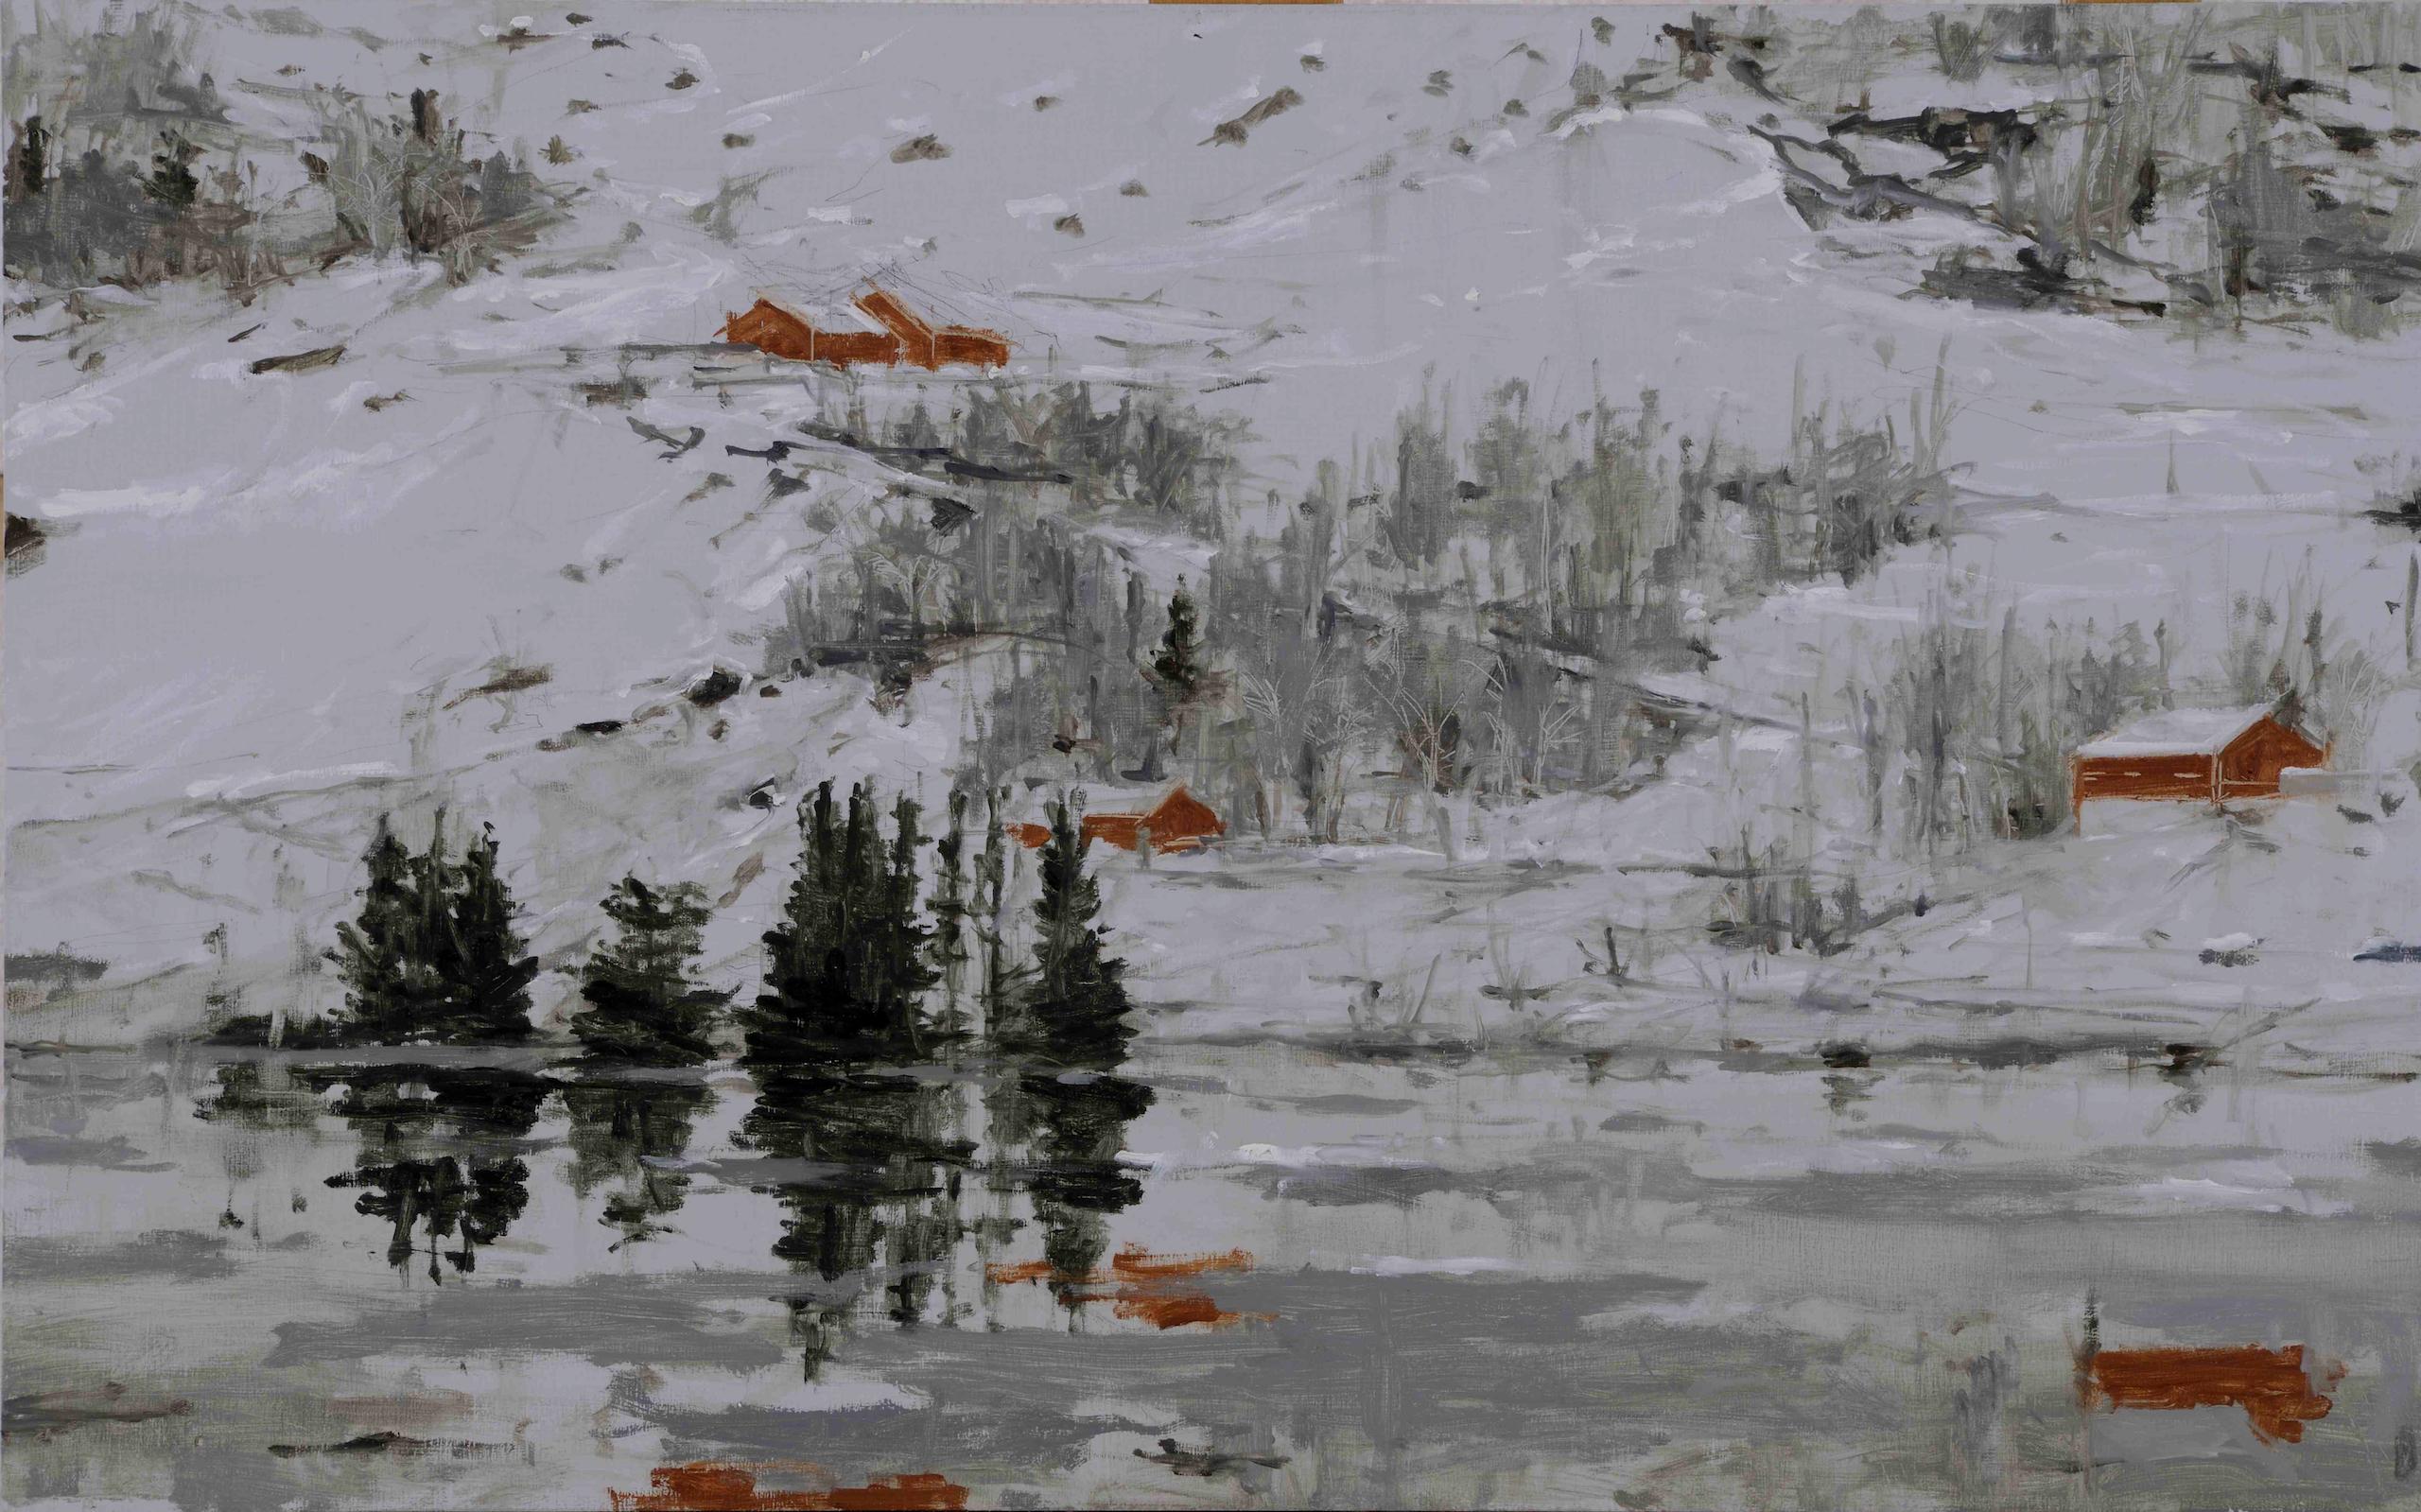 Narvik No. 2 by Calo Carratalá - Landscape painting, snowy mountain, winter